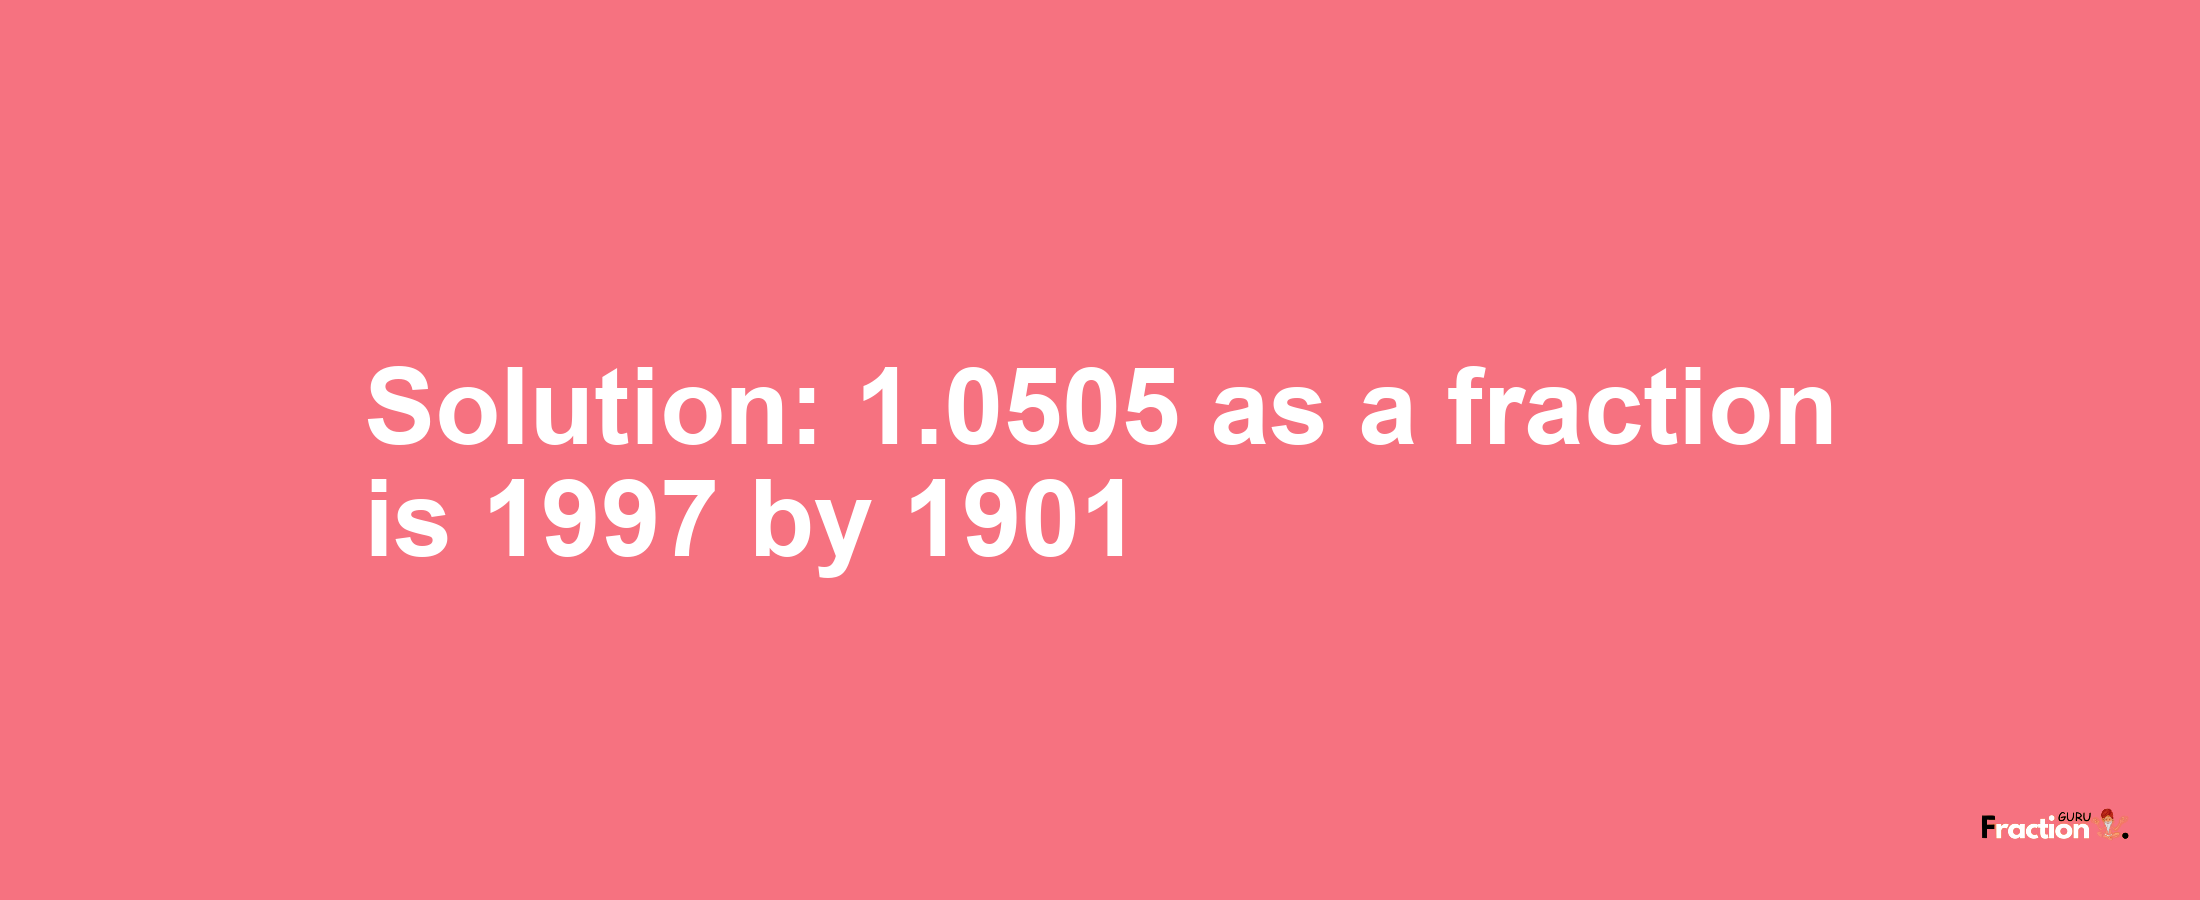 Solution:1.0505 as a fraction is 1997/1901